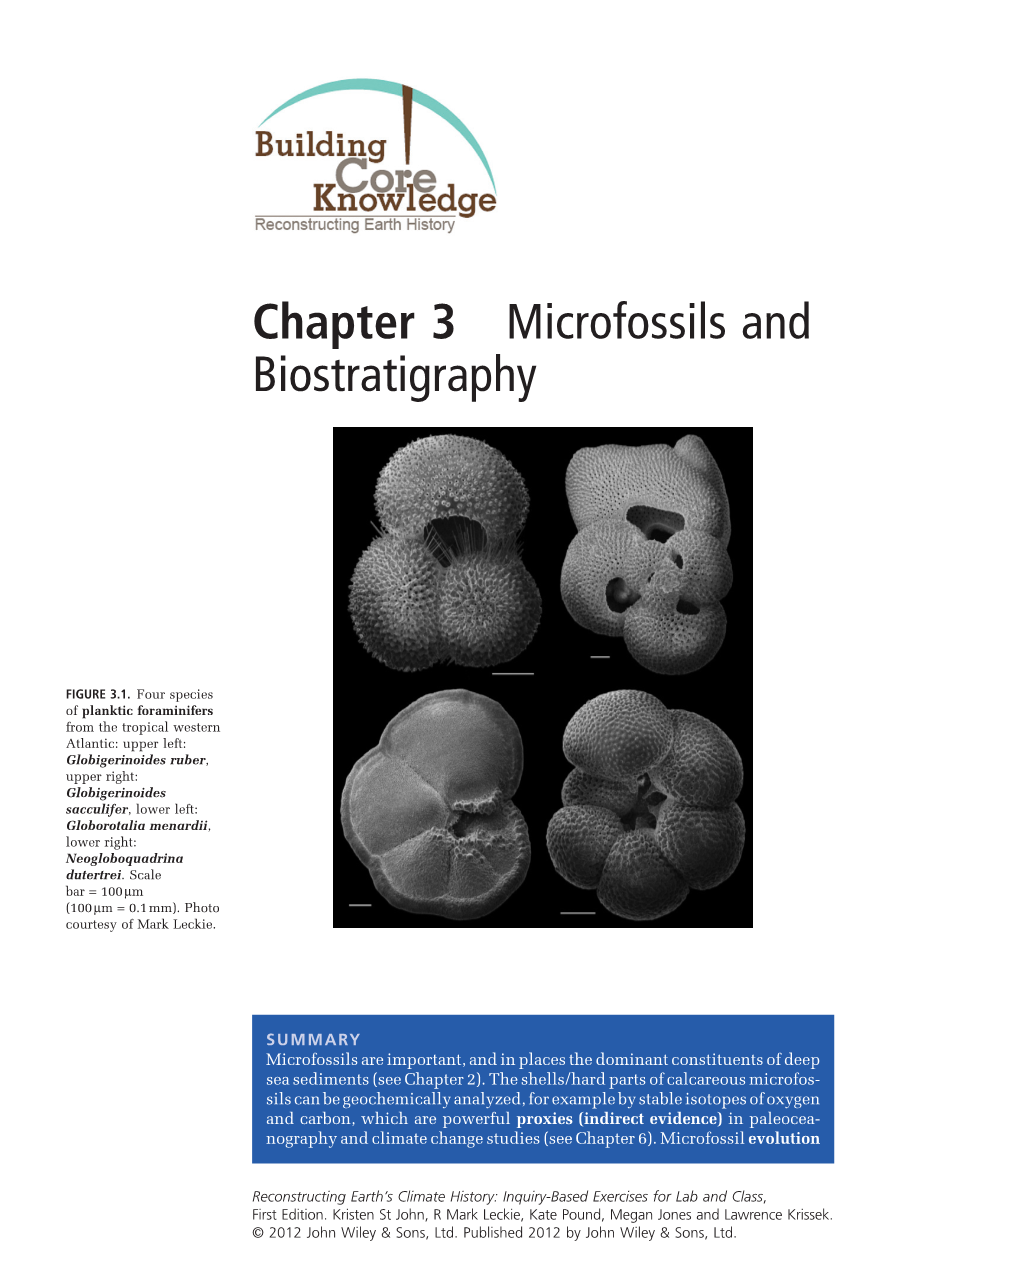 Microfossils and Biostratigraphy